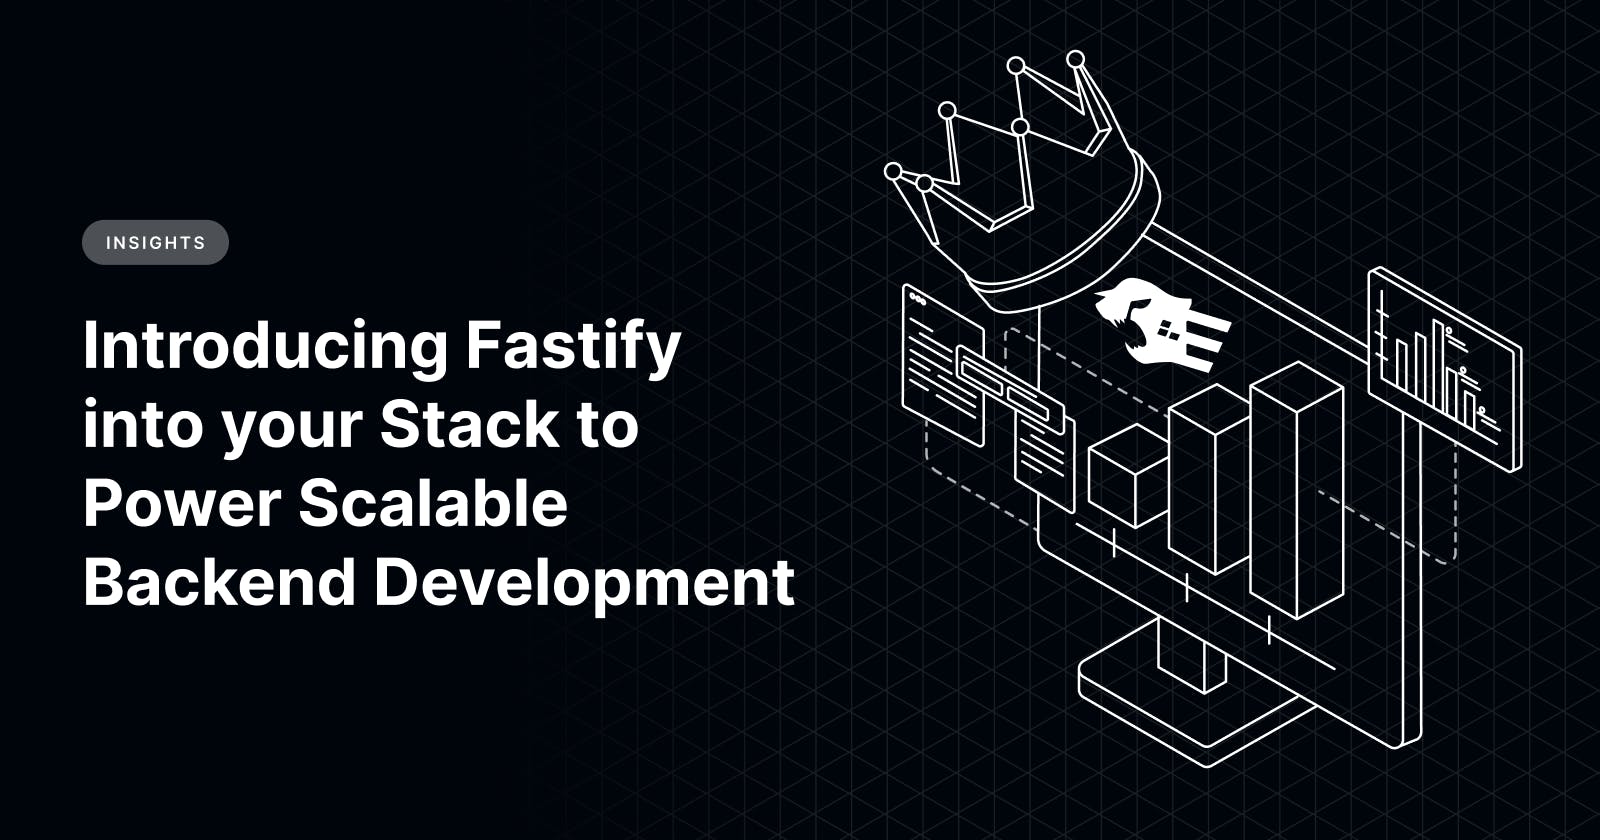 Fastify Fundamentals: Introducing Fastify into your Stack for Scalable Backend Development